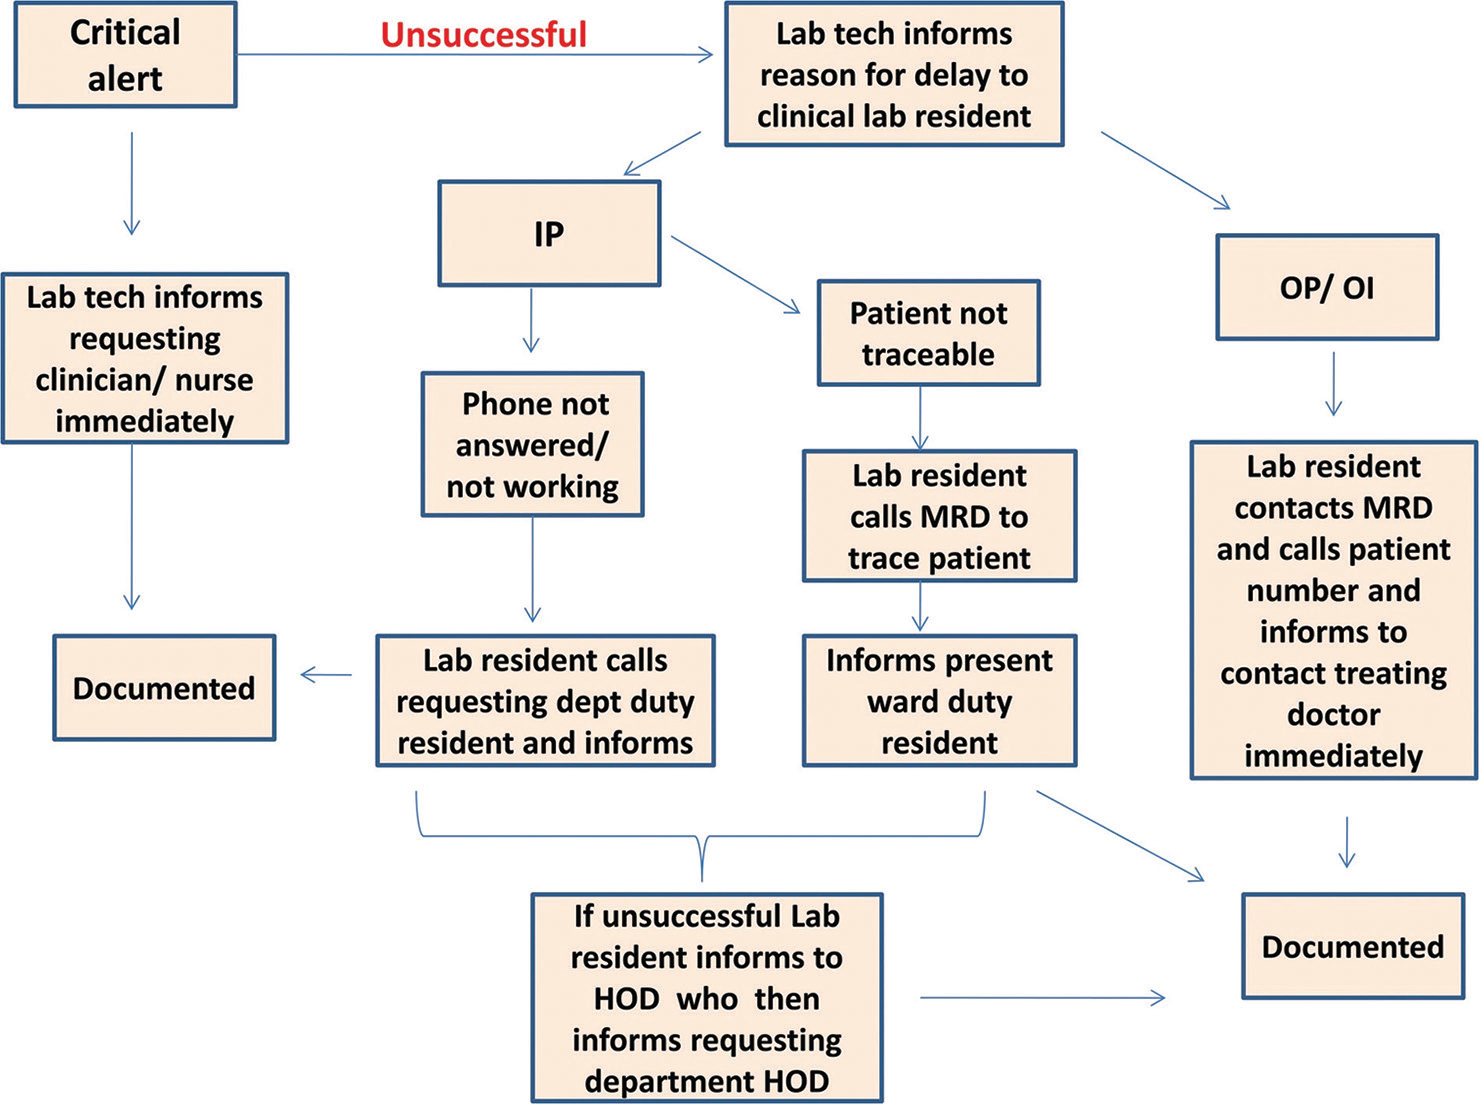 Flowchart for optimizing the turnaround time (TAT) in delayed critical result notifications. HOD, head of department; IP, inpatients; MRD, medical record department; OI, other hospital investigations; OP, outpatients.